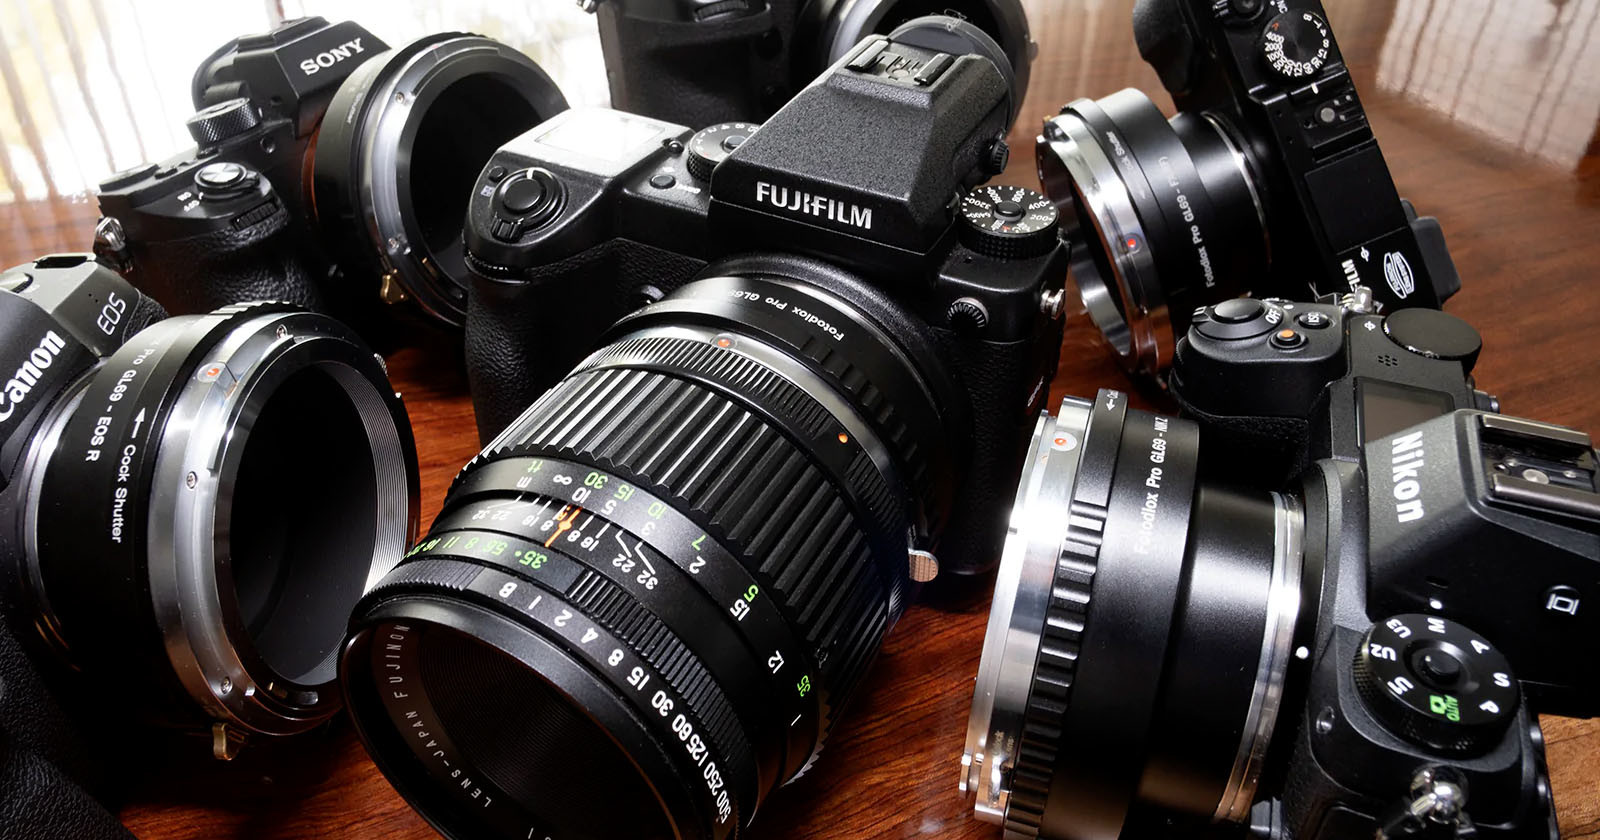 Fotodiox Adapter Lets You Use Fujica GL690 Lenses on Mirrorless Cameras